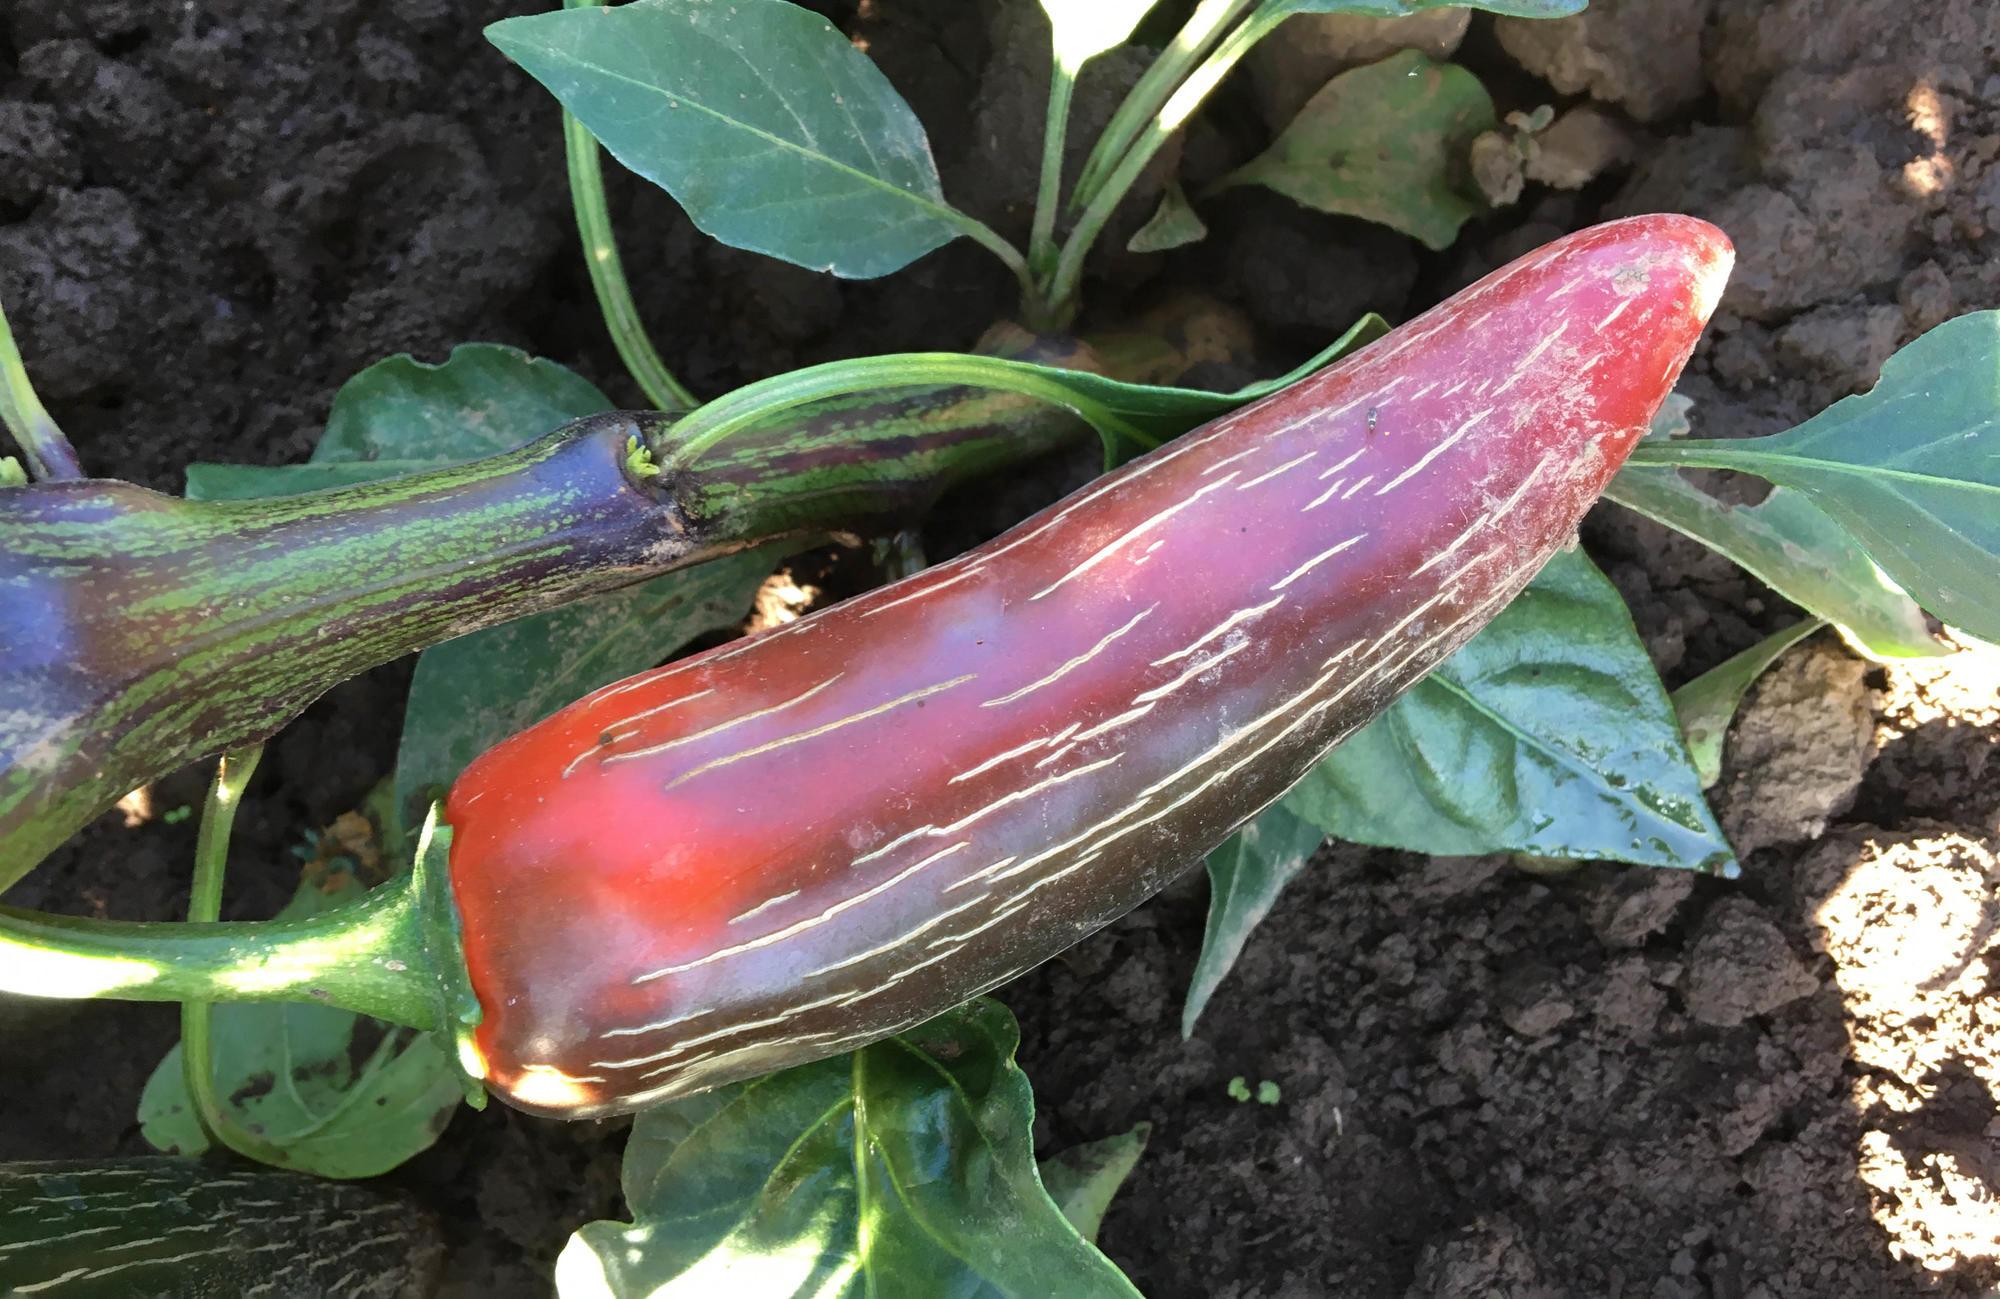 long red pepper with cracks; vine growing in dry soil